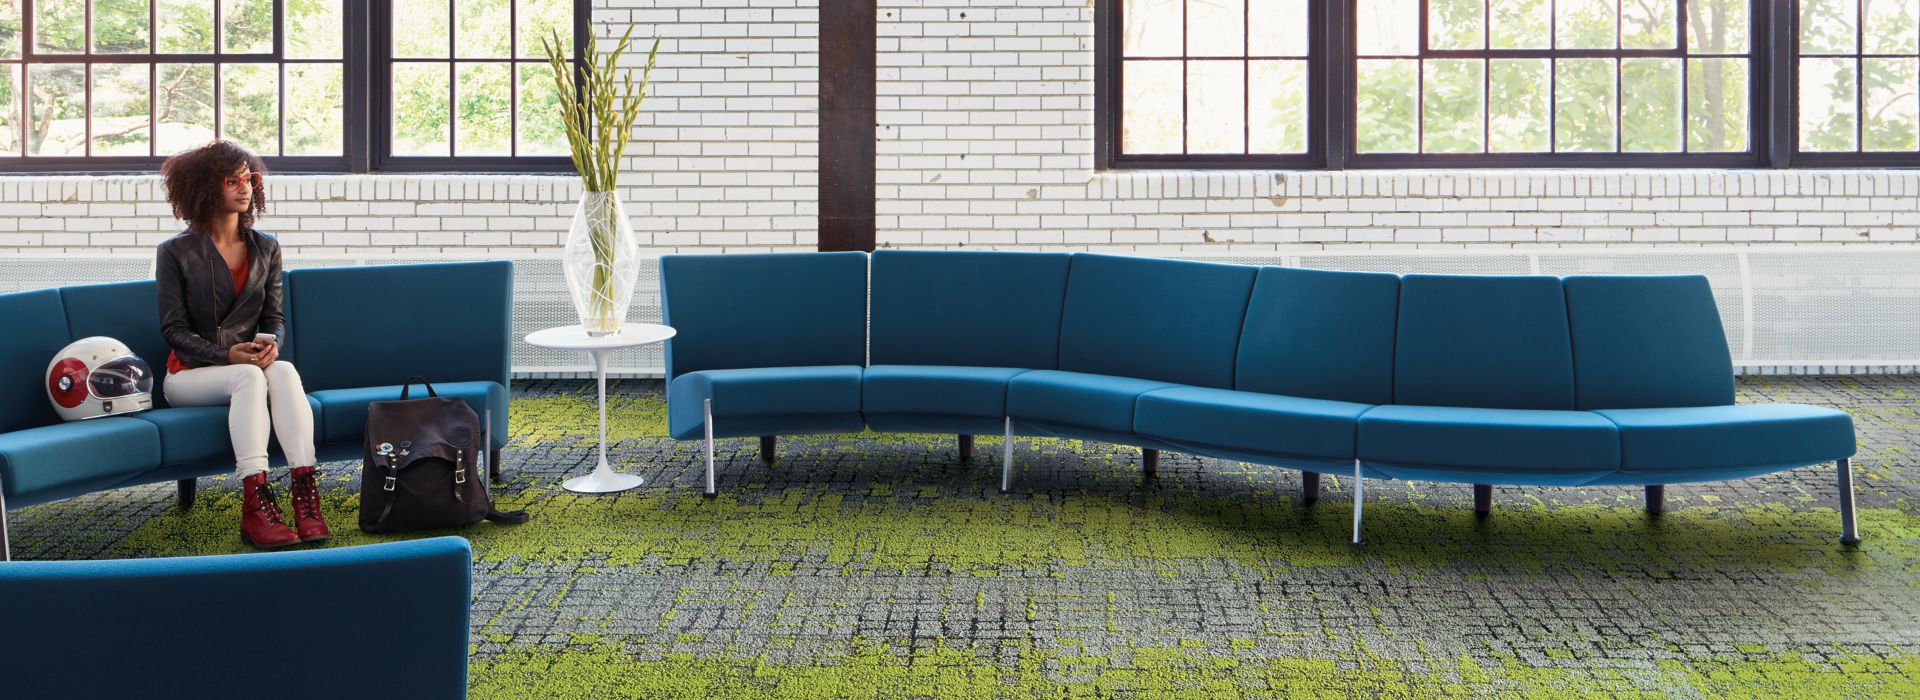 Interface Moss and Moss in Stone carpet tile in seating area with blue couches and women seated imagen número 1